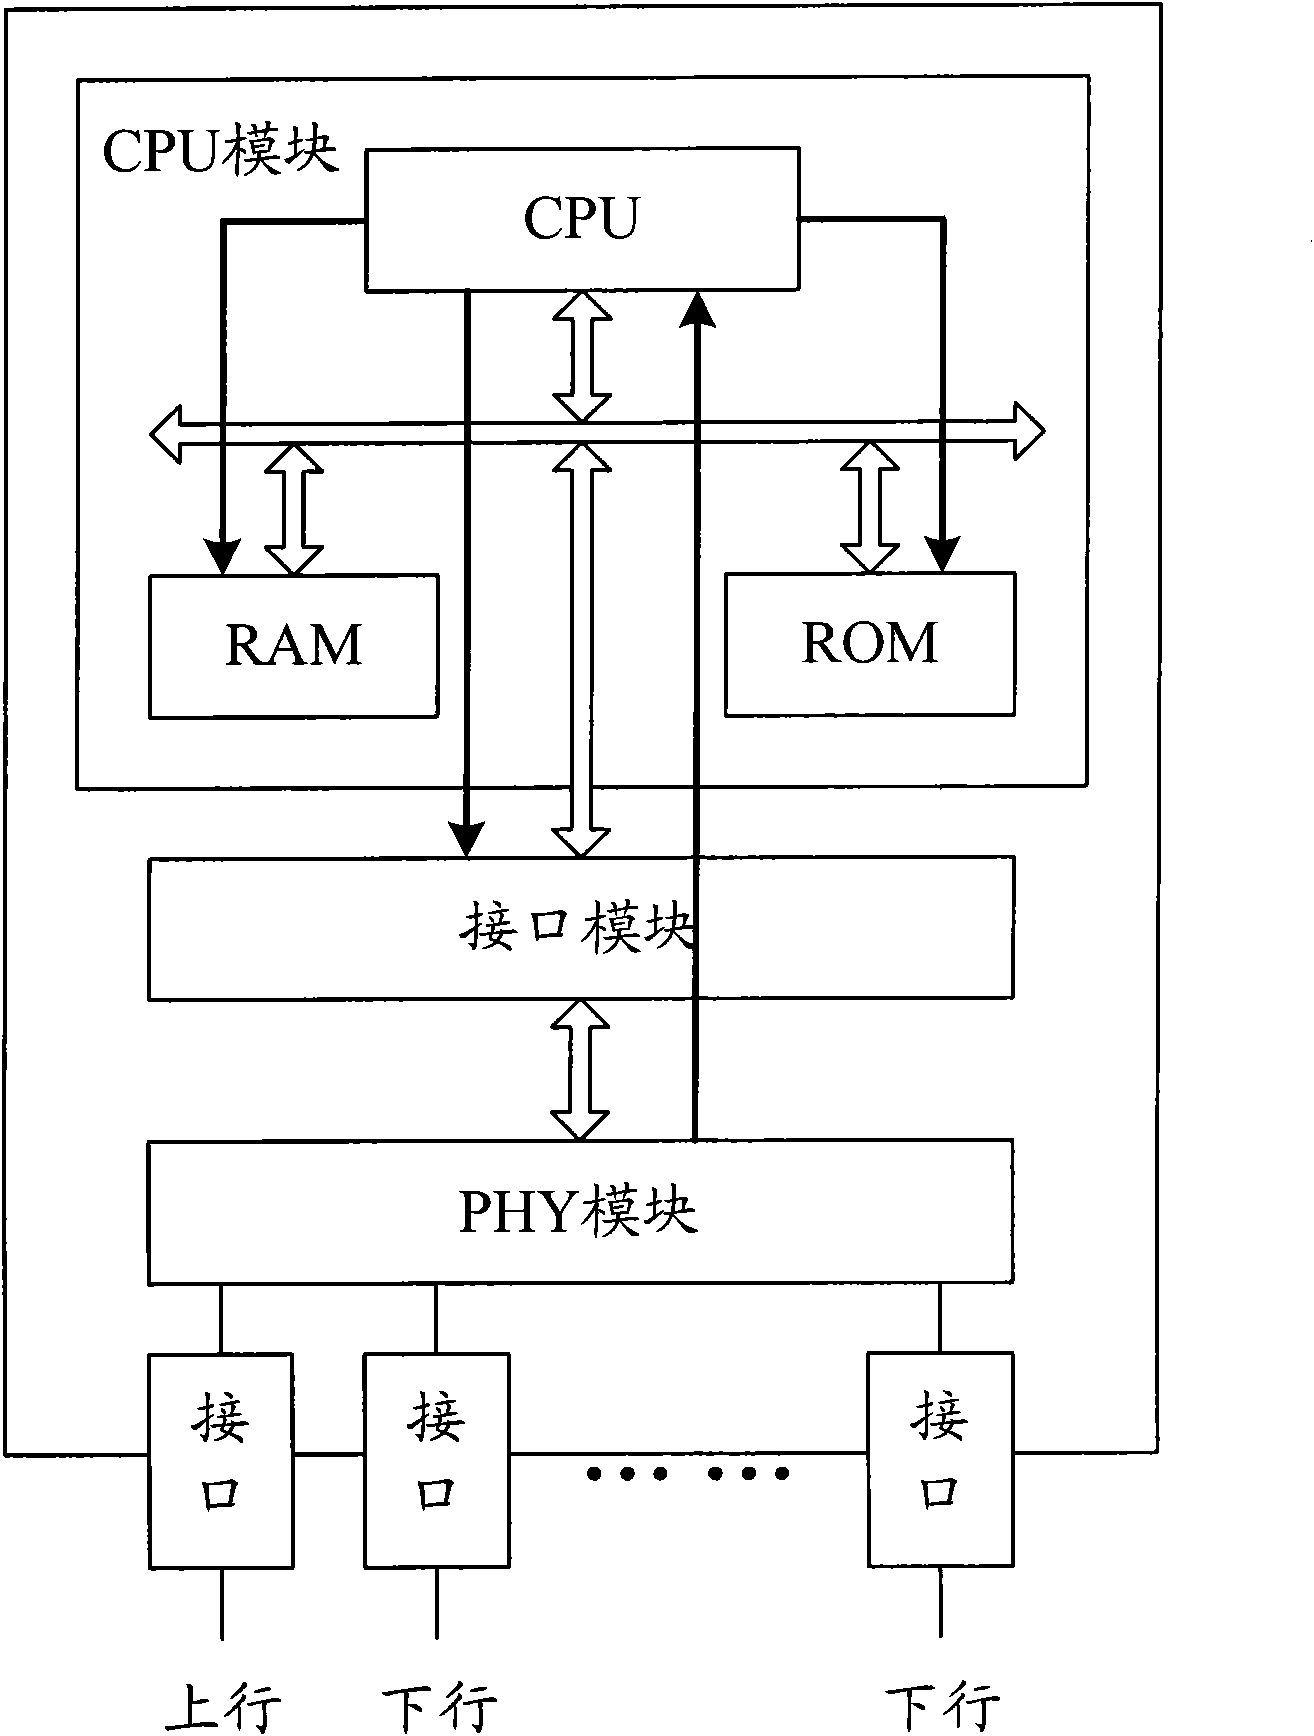 Digital communication device capable of saving electricity, and electricity-saving control device and method thereof